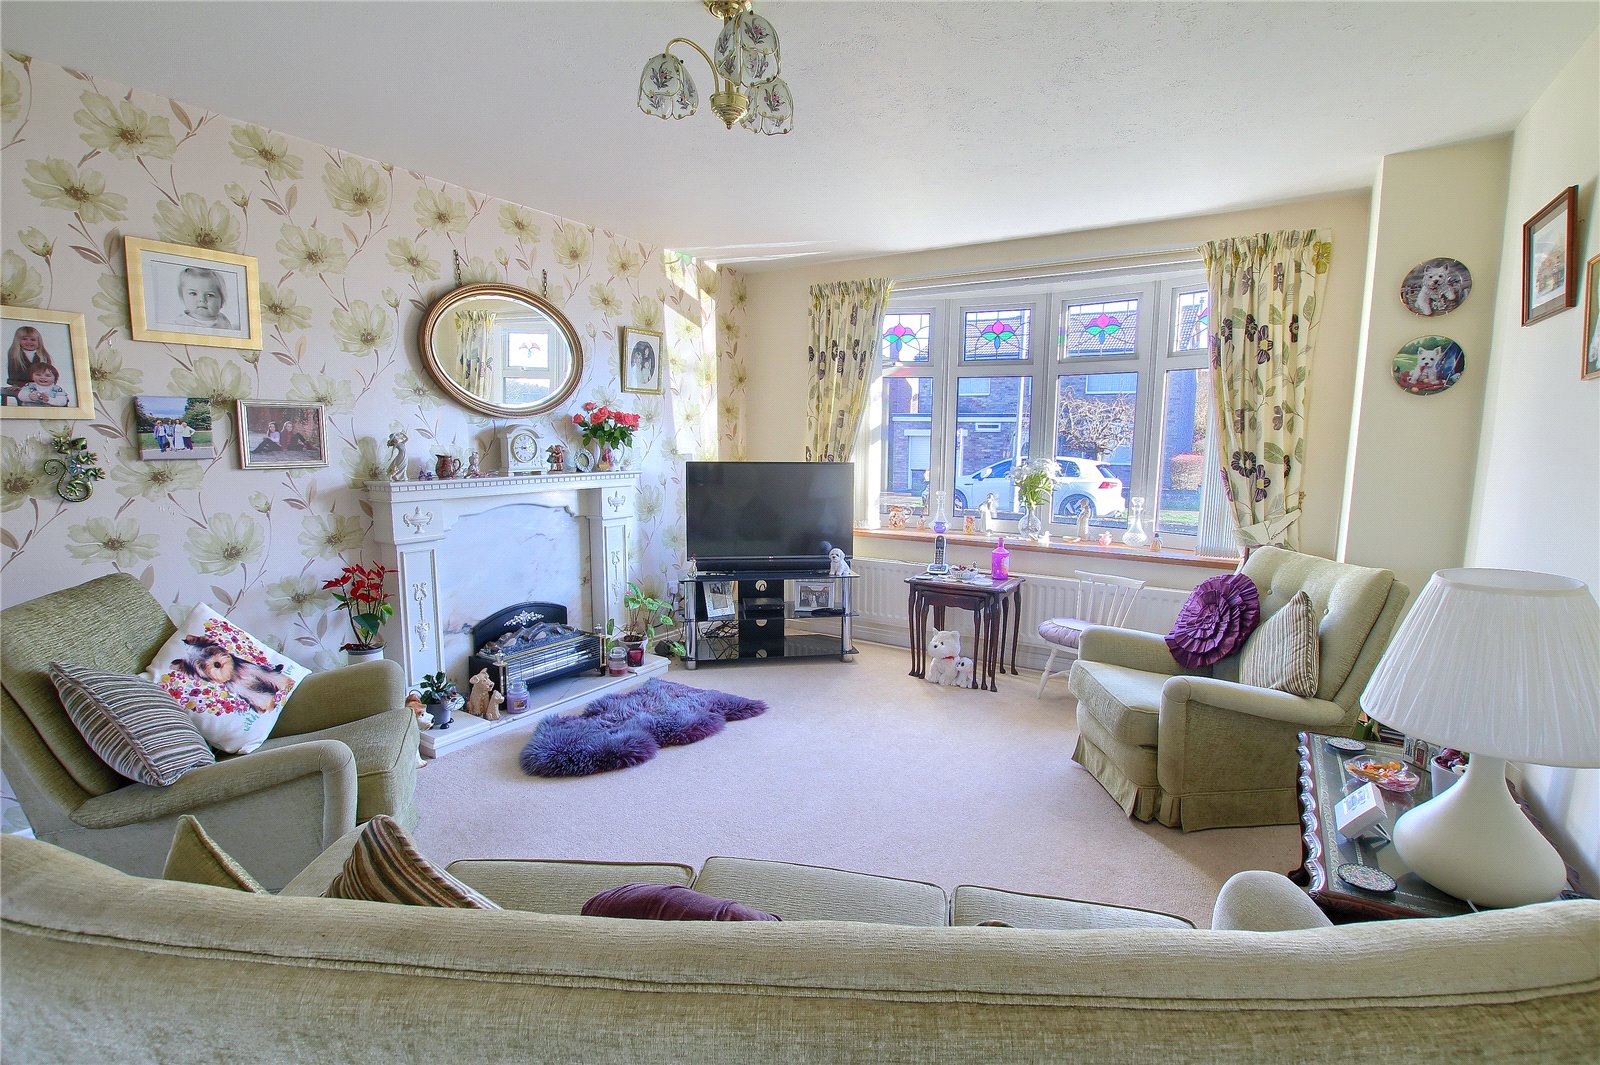 4 bed house for sale in Wolviston Court, Billingham  - Property Image 8